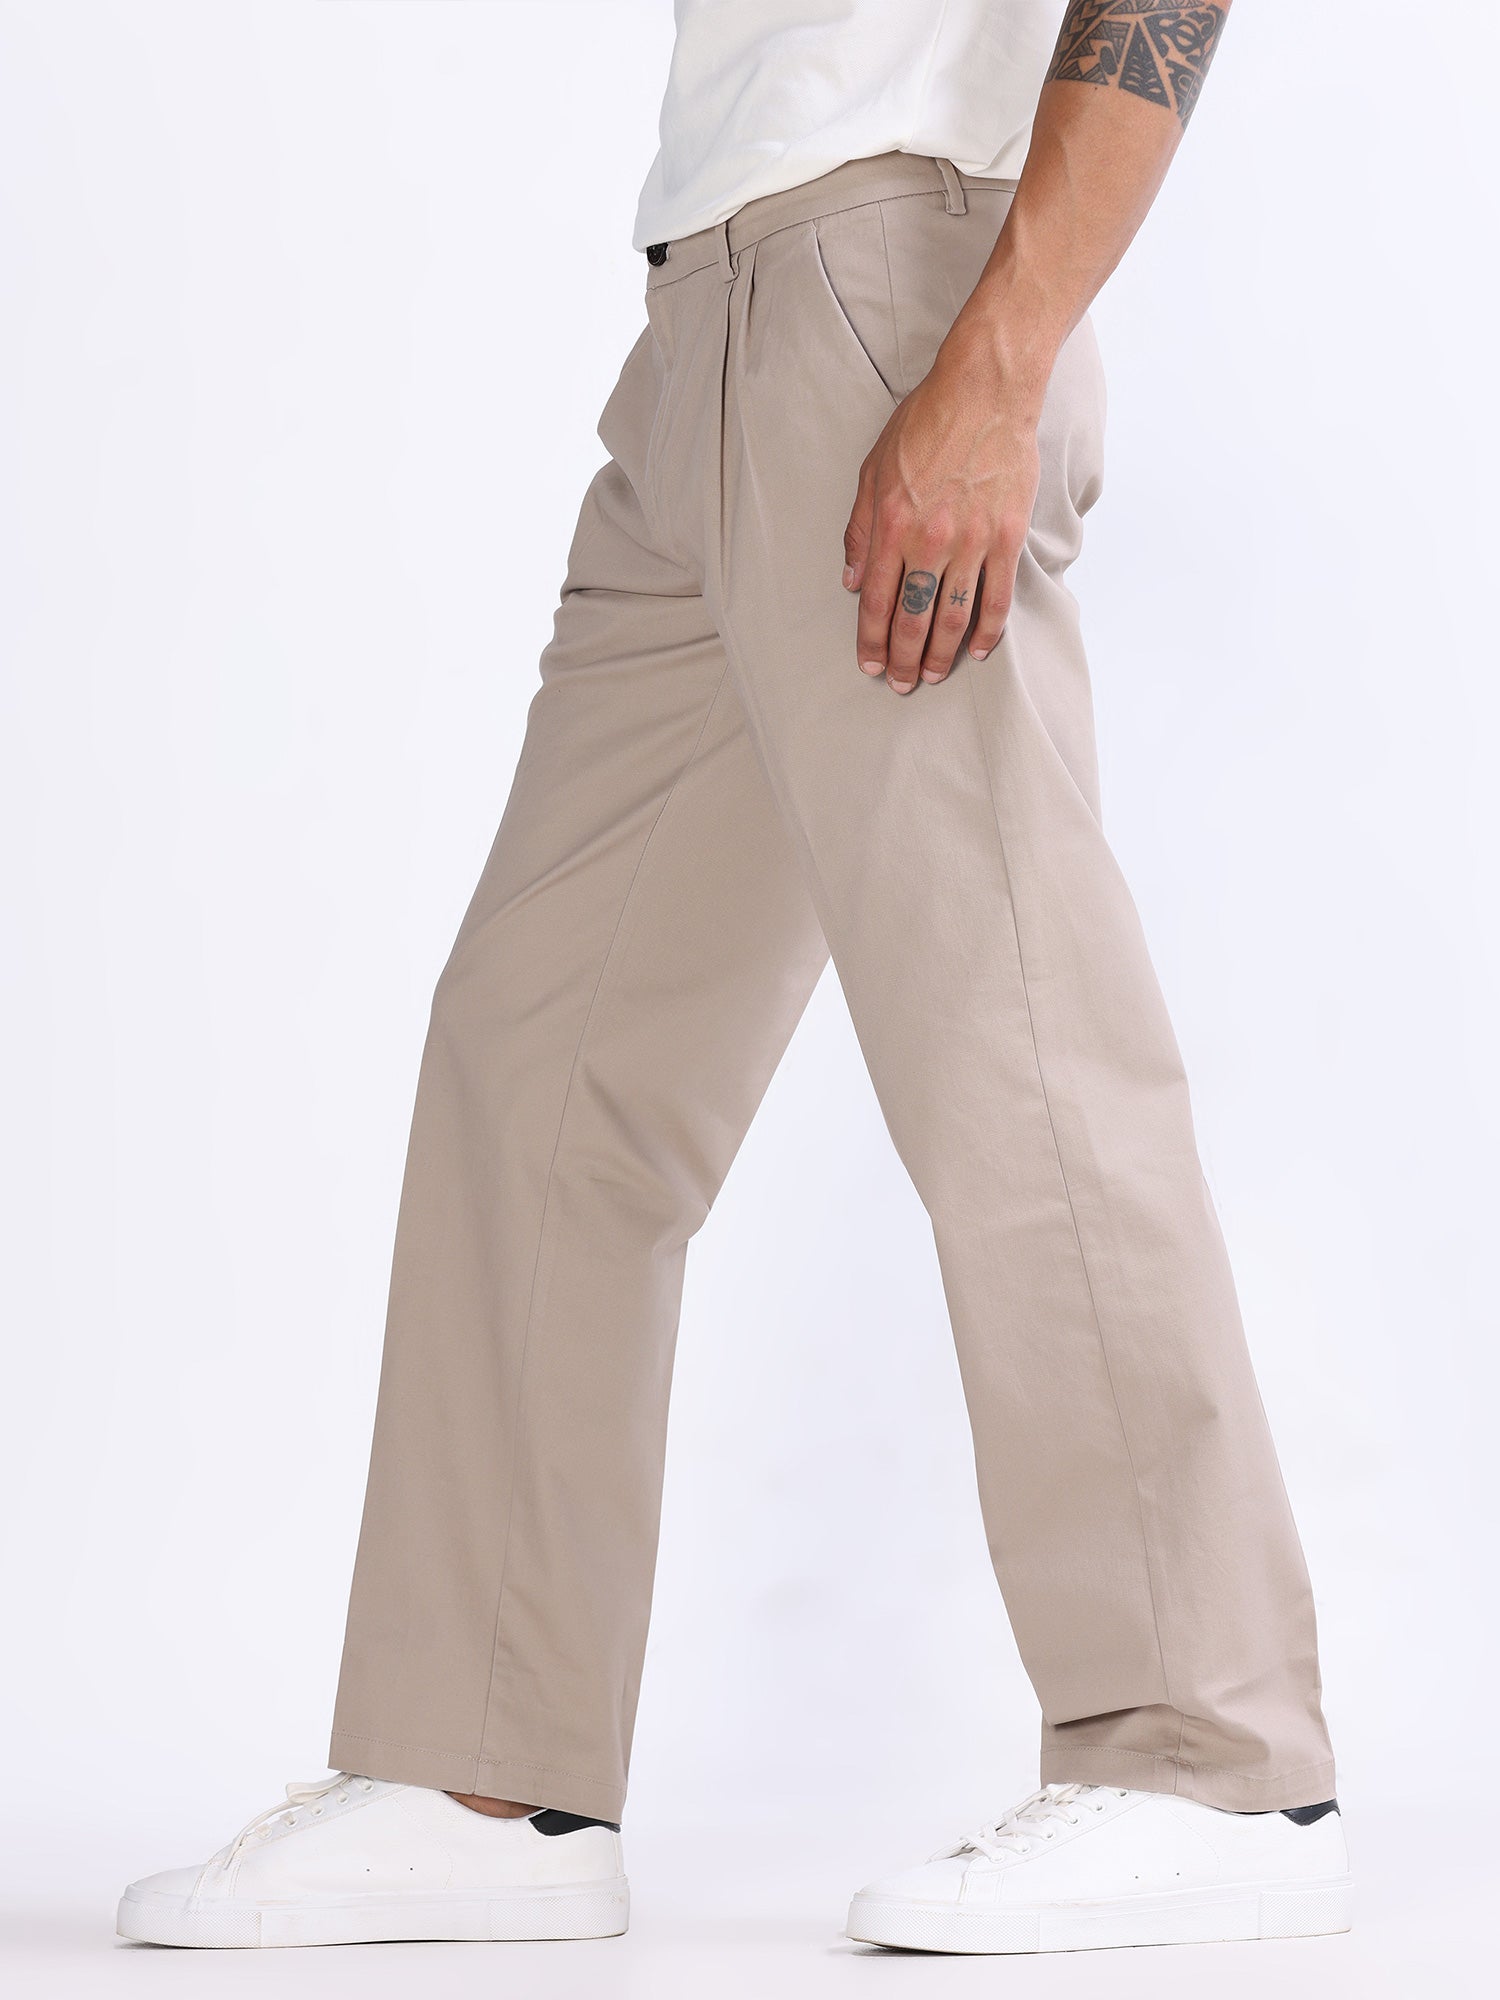 Buy Campus Chinos trousers & Pants online - Men - 1 products | FASHIOLA  INDIA